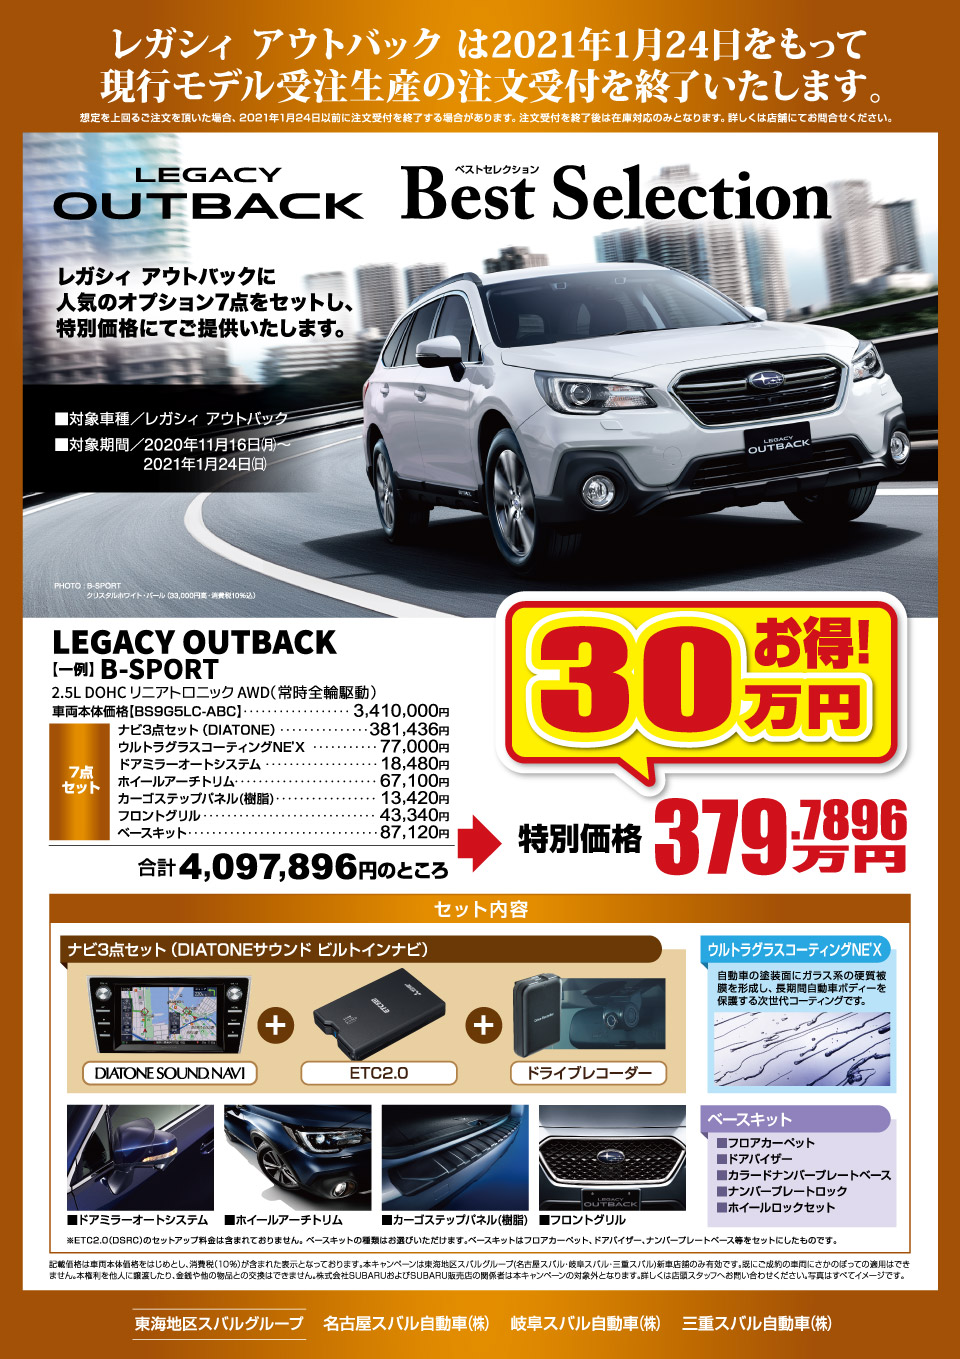 LEGACY_OUTBACK_BestSelection